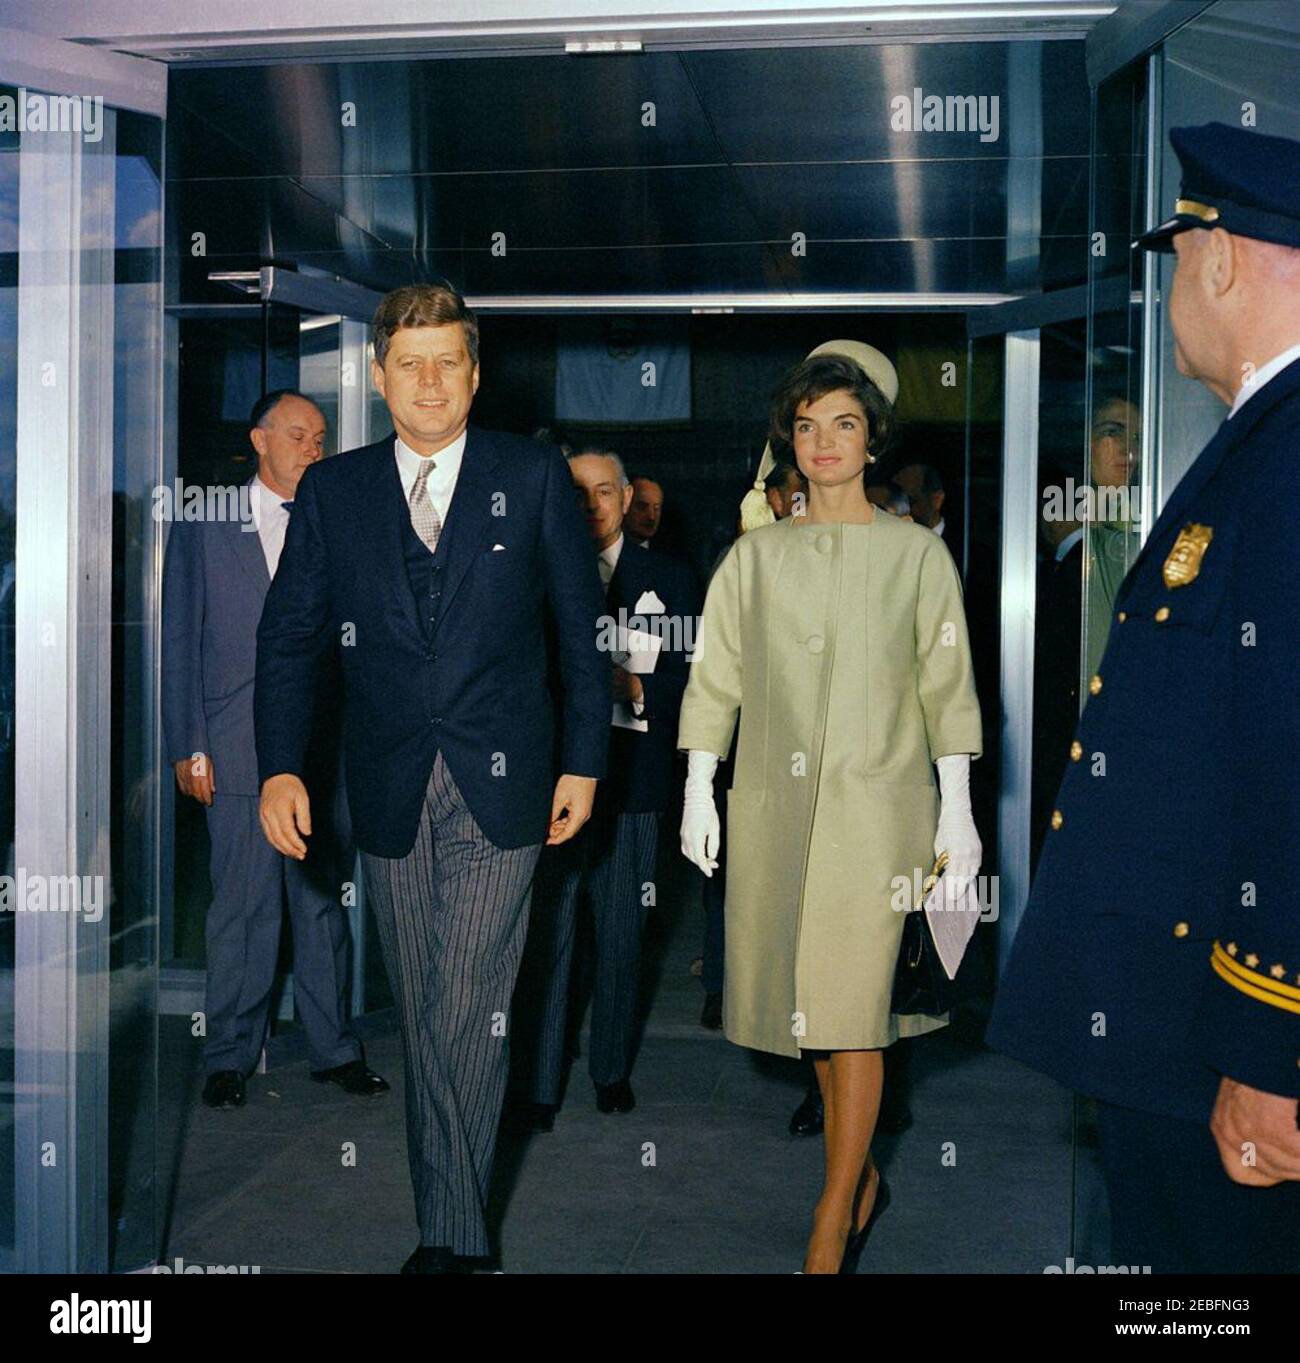 Ceremony celebrating the Unification of Italy, 10:31AM. Ceremony celebrating the Unification of Italy. L-R: Unidentified man; President John F. Kennedy; Head of the Italian Delegation to the United Nations, Gaetano Martino (partially hidden behind President Kennedy); First Lady Jacqueline Kennedy; unidentified police officer. State Department, Washington, D.C.rnrn Stock Photo